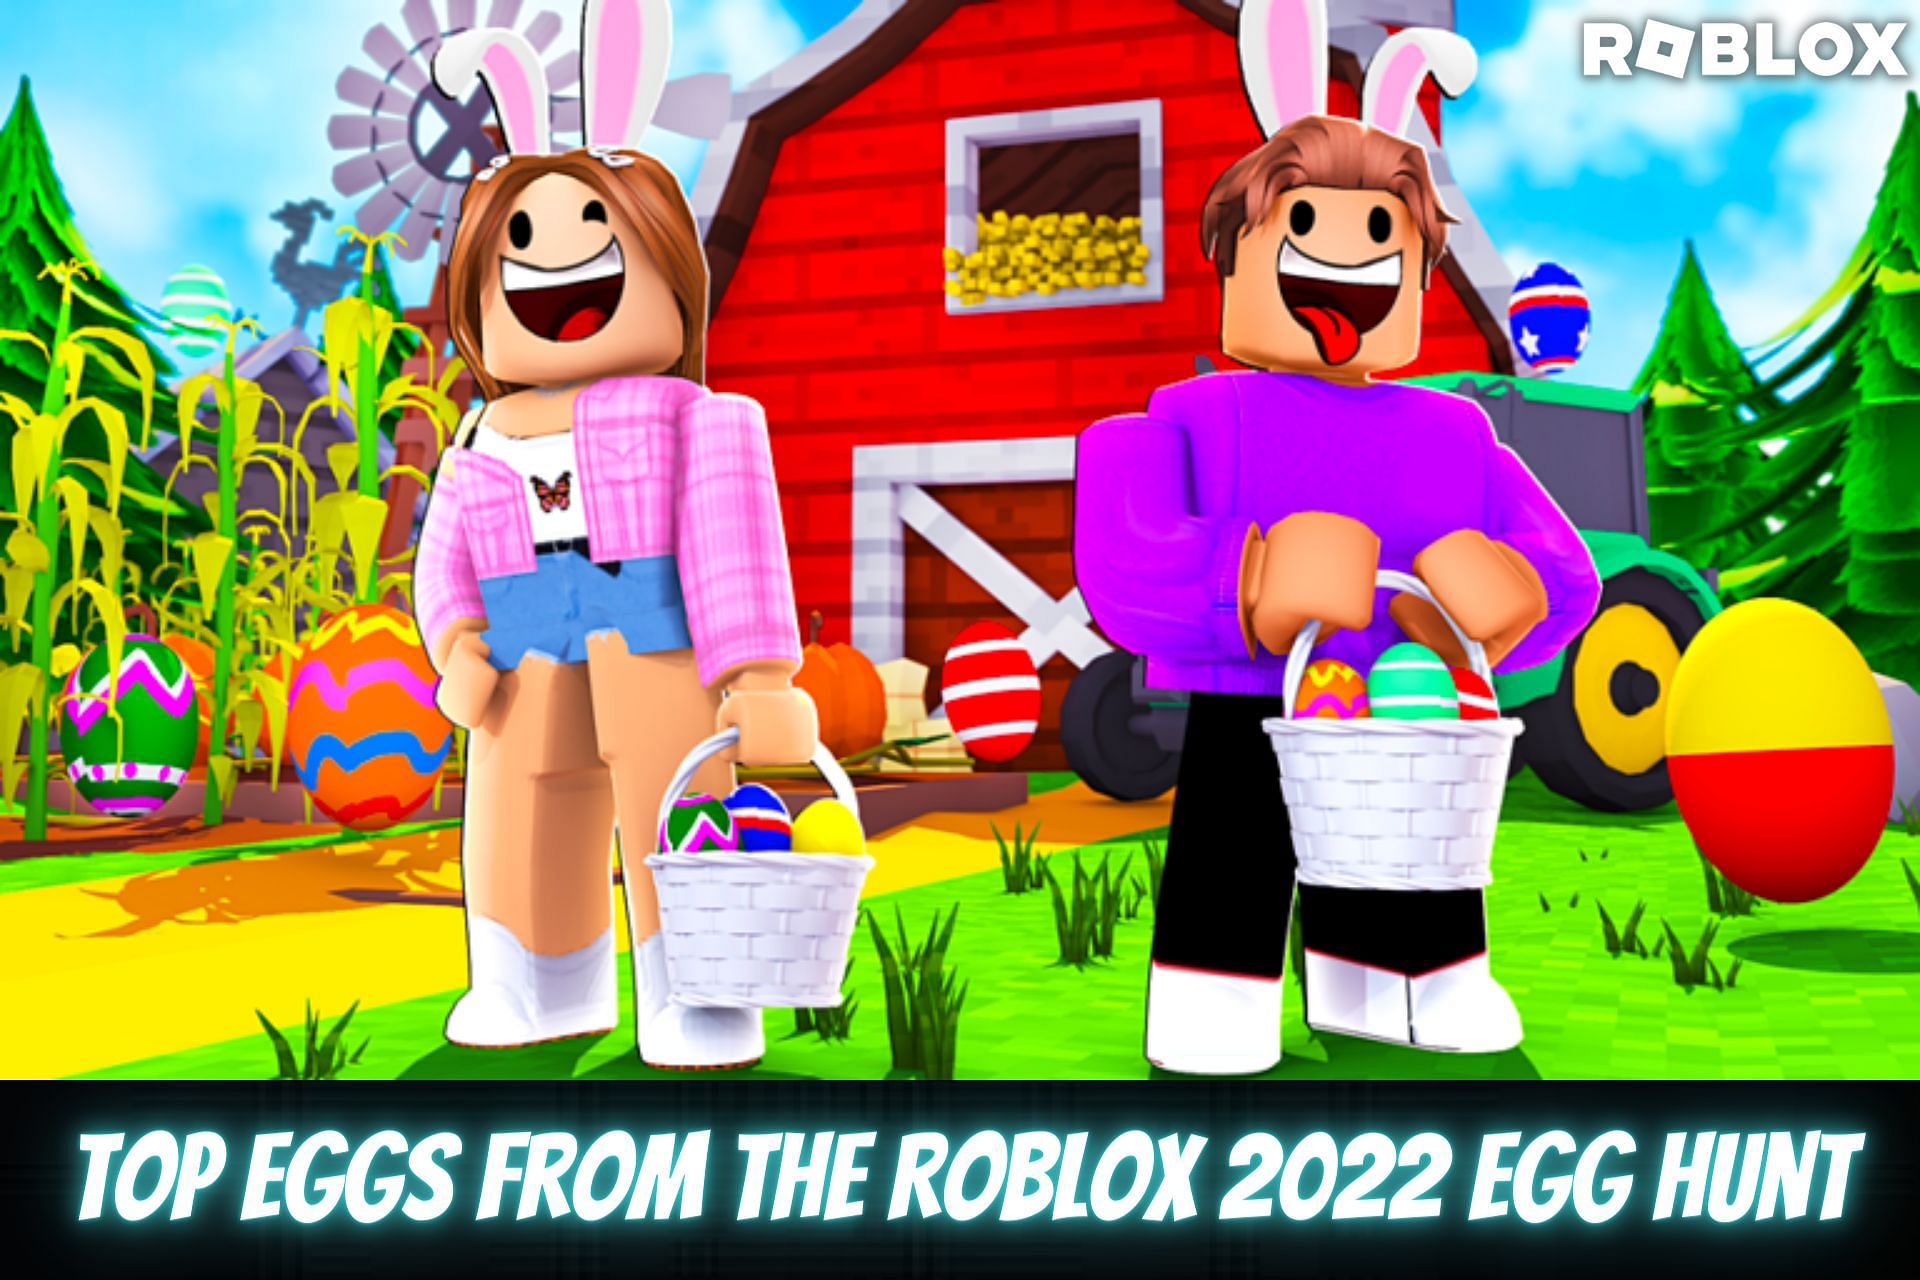 RoPro Roblox Extension on X: RoPro users can now view their Egg Collection  on their Roblox profile! We teamed up with Egg Hunt 2022: Lost in Time to  bring hunting eggs back